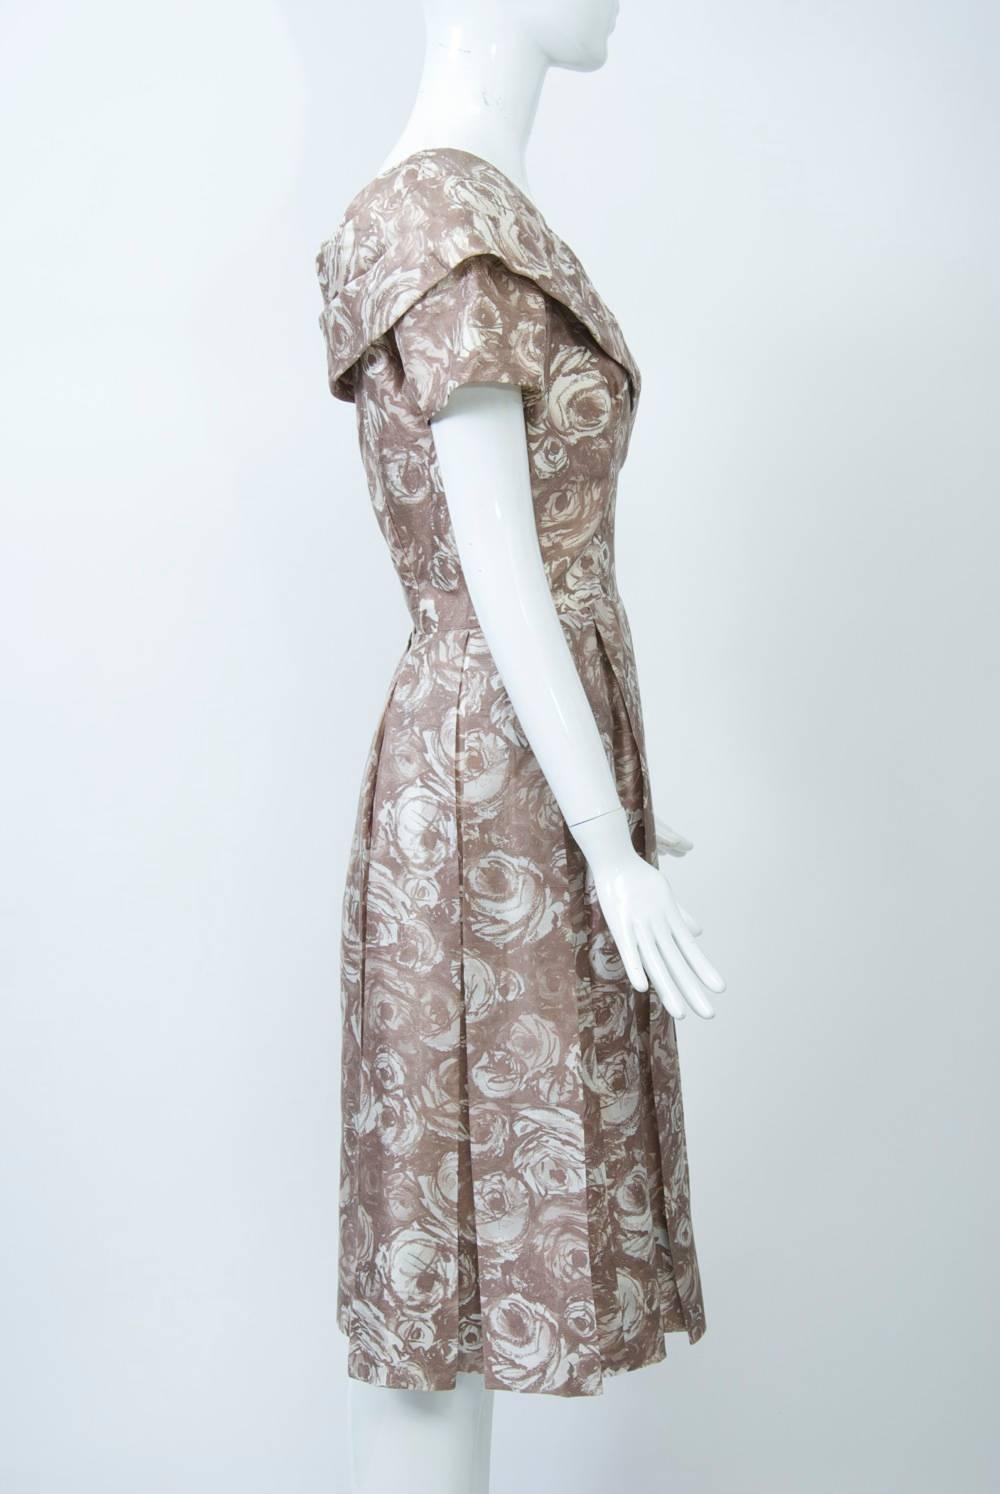 Suzy Perette Silk Print Dress In Excellent Condition For Sale In Alford, MA